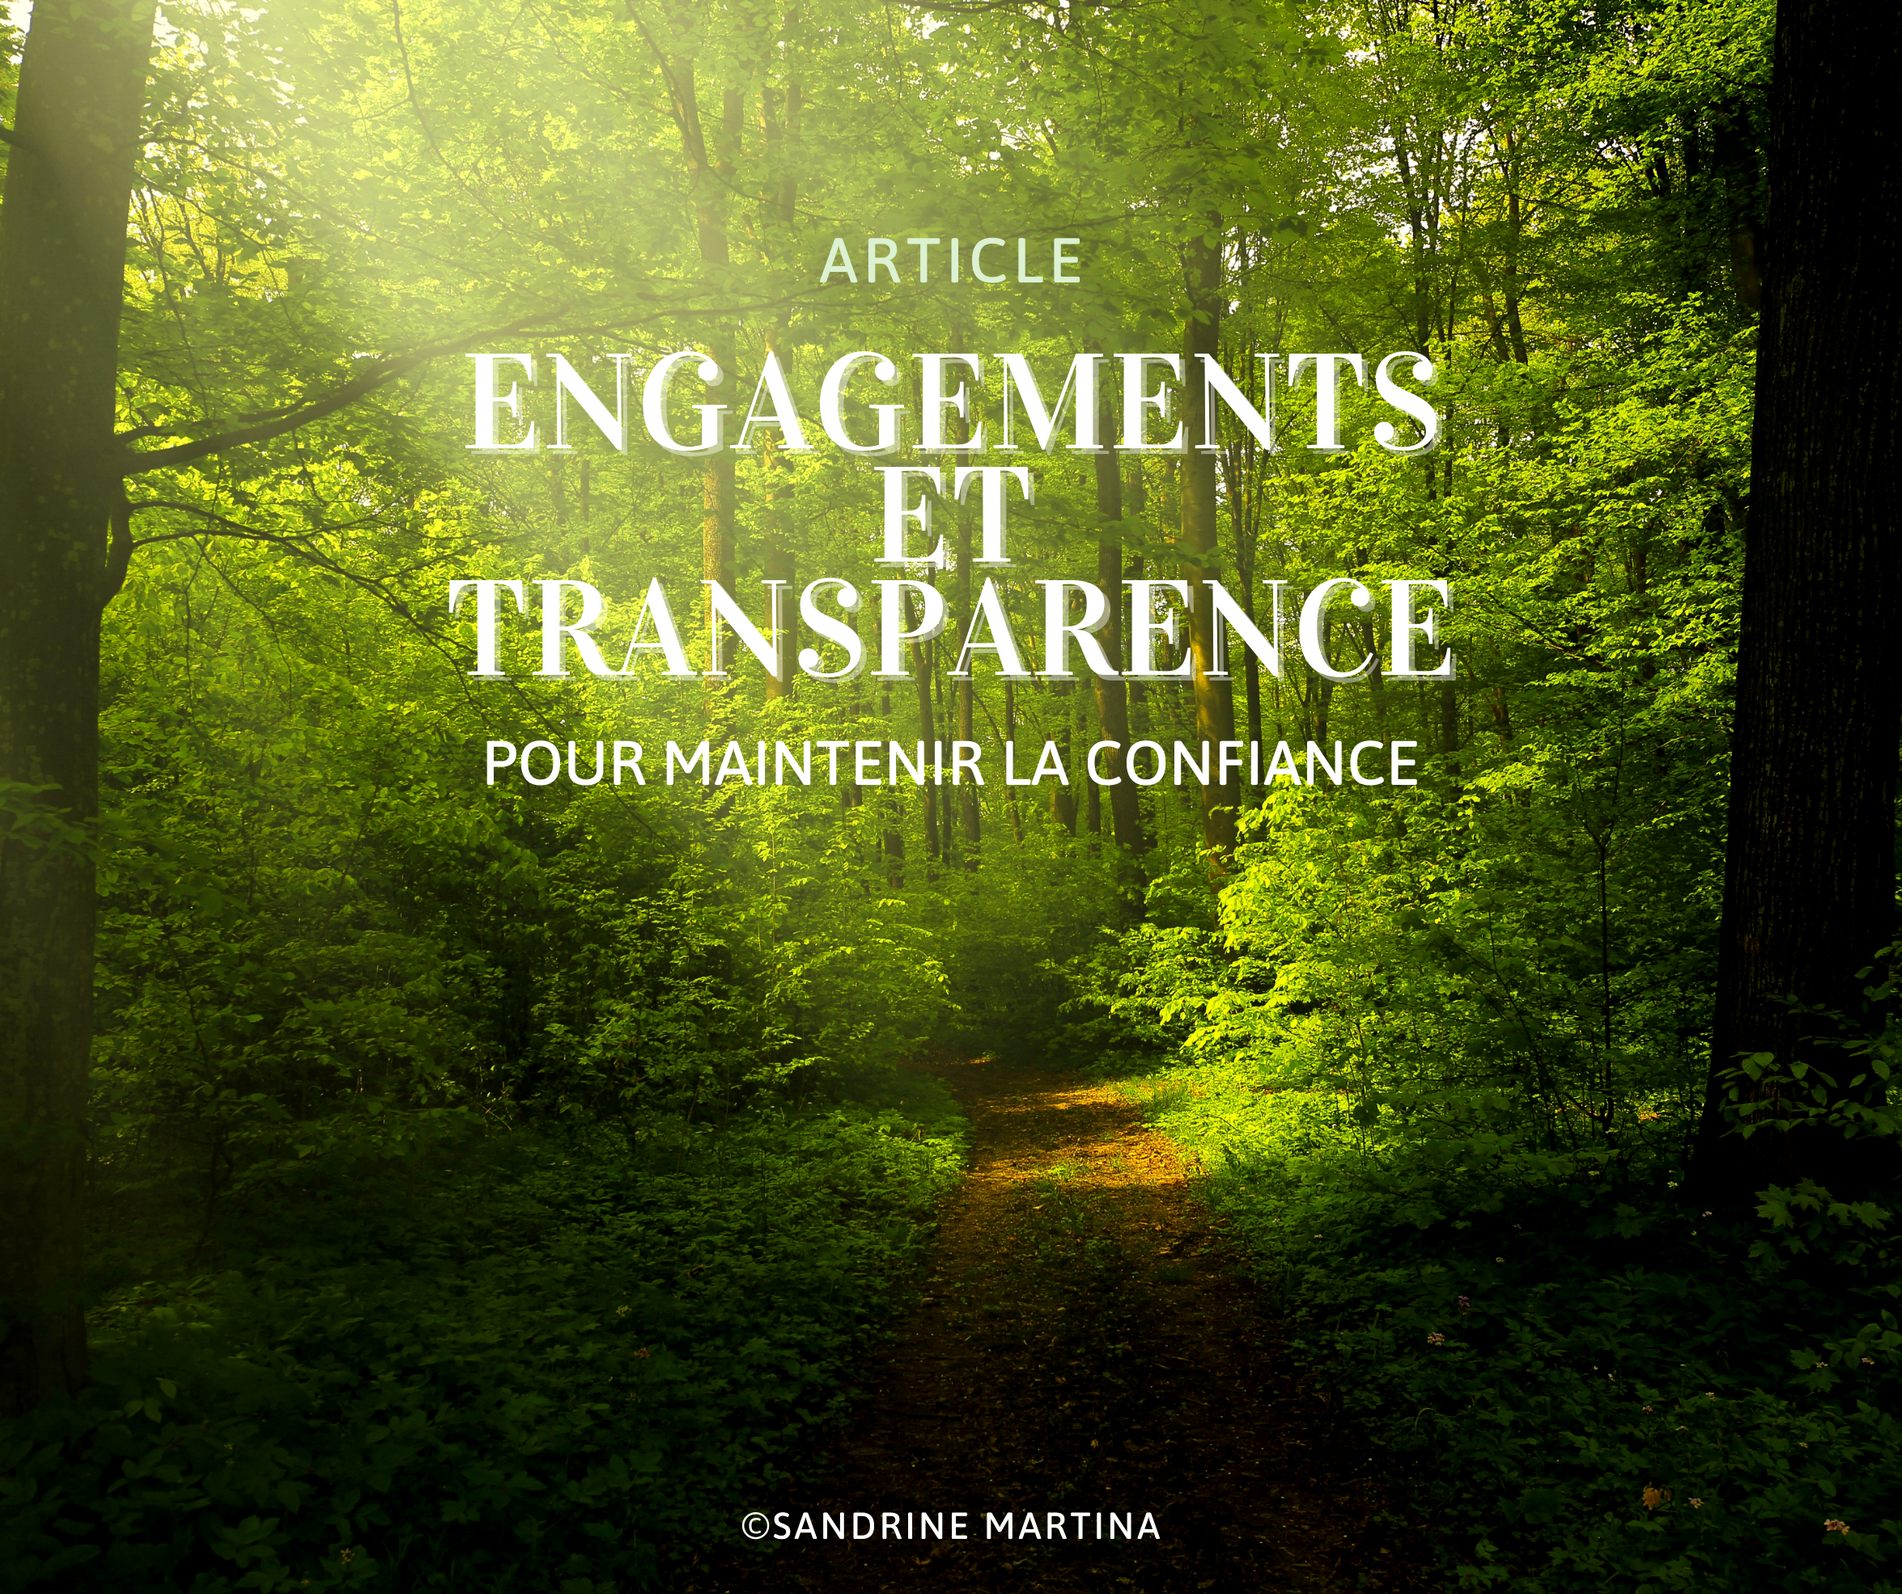 Article engagements et transparence hypnose guingamp sandrine martina foret nature paisible 2024